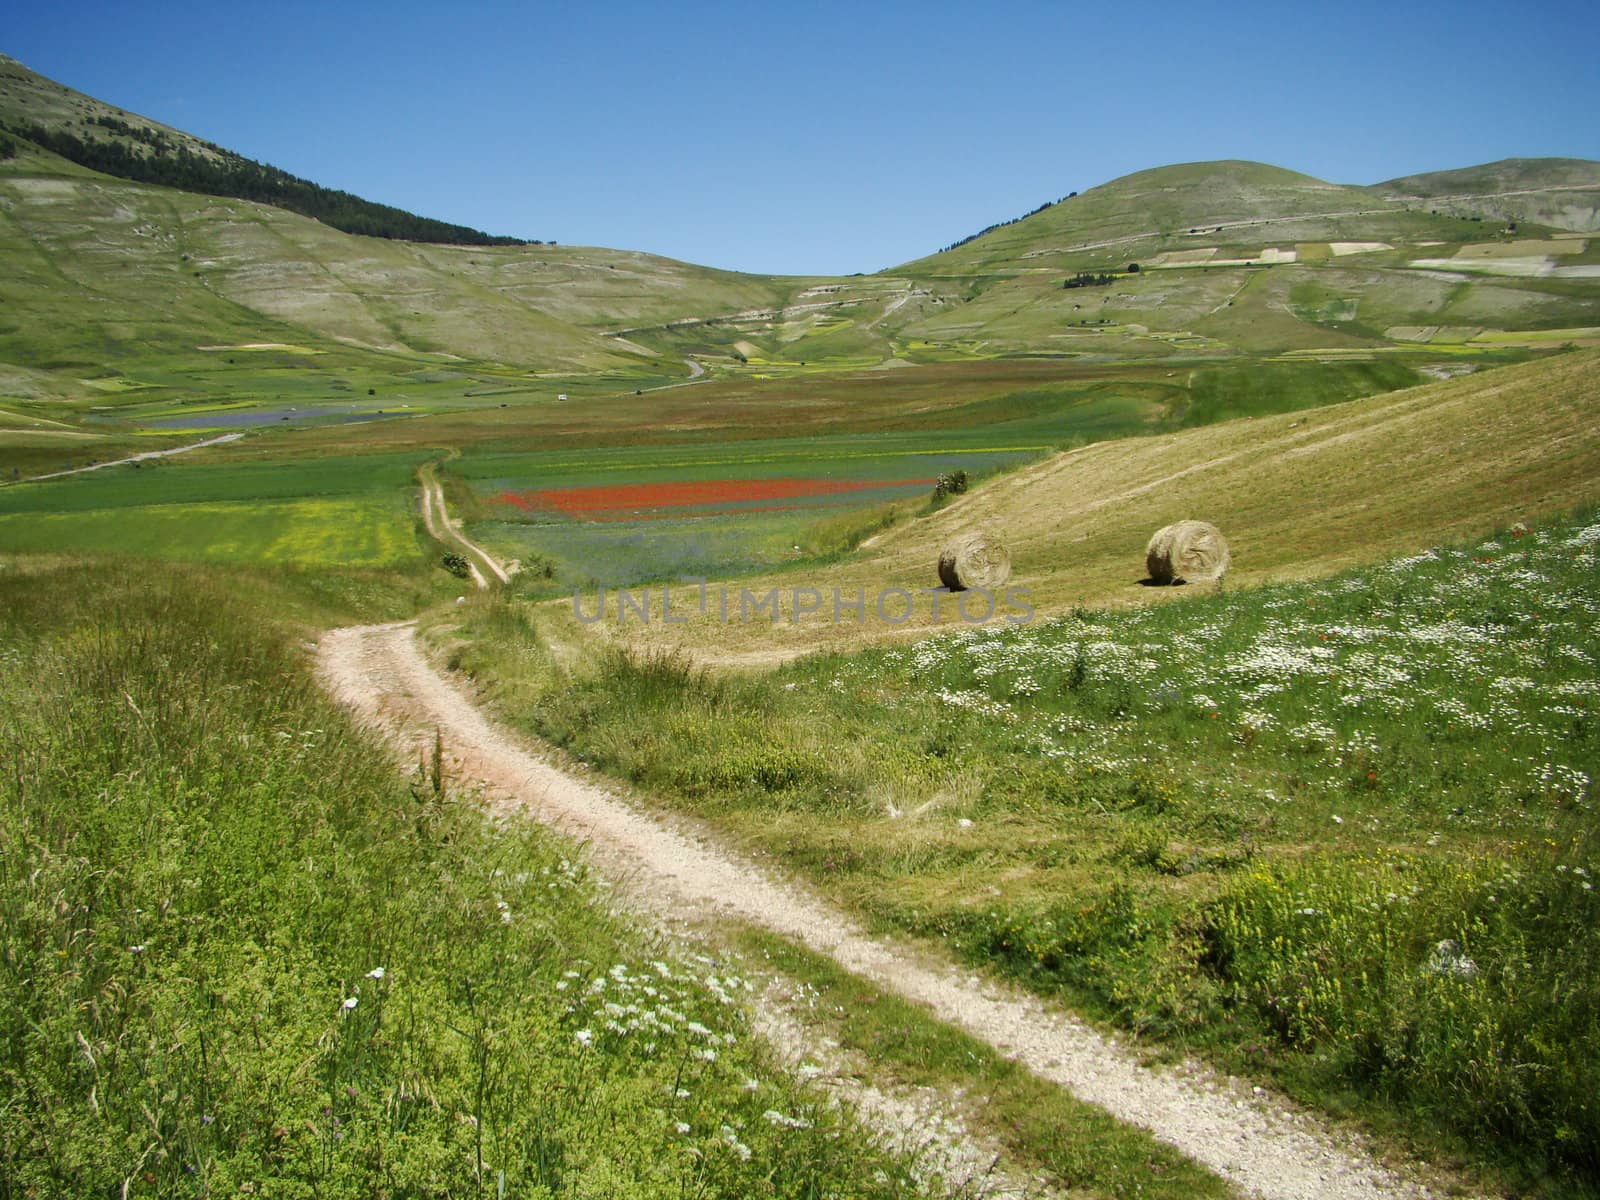 scenery of Piano Grande (Great Plateau) in Sibillini Mountains, central Italy.